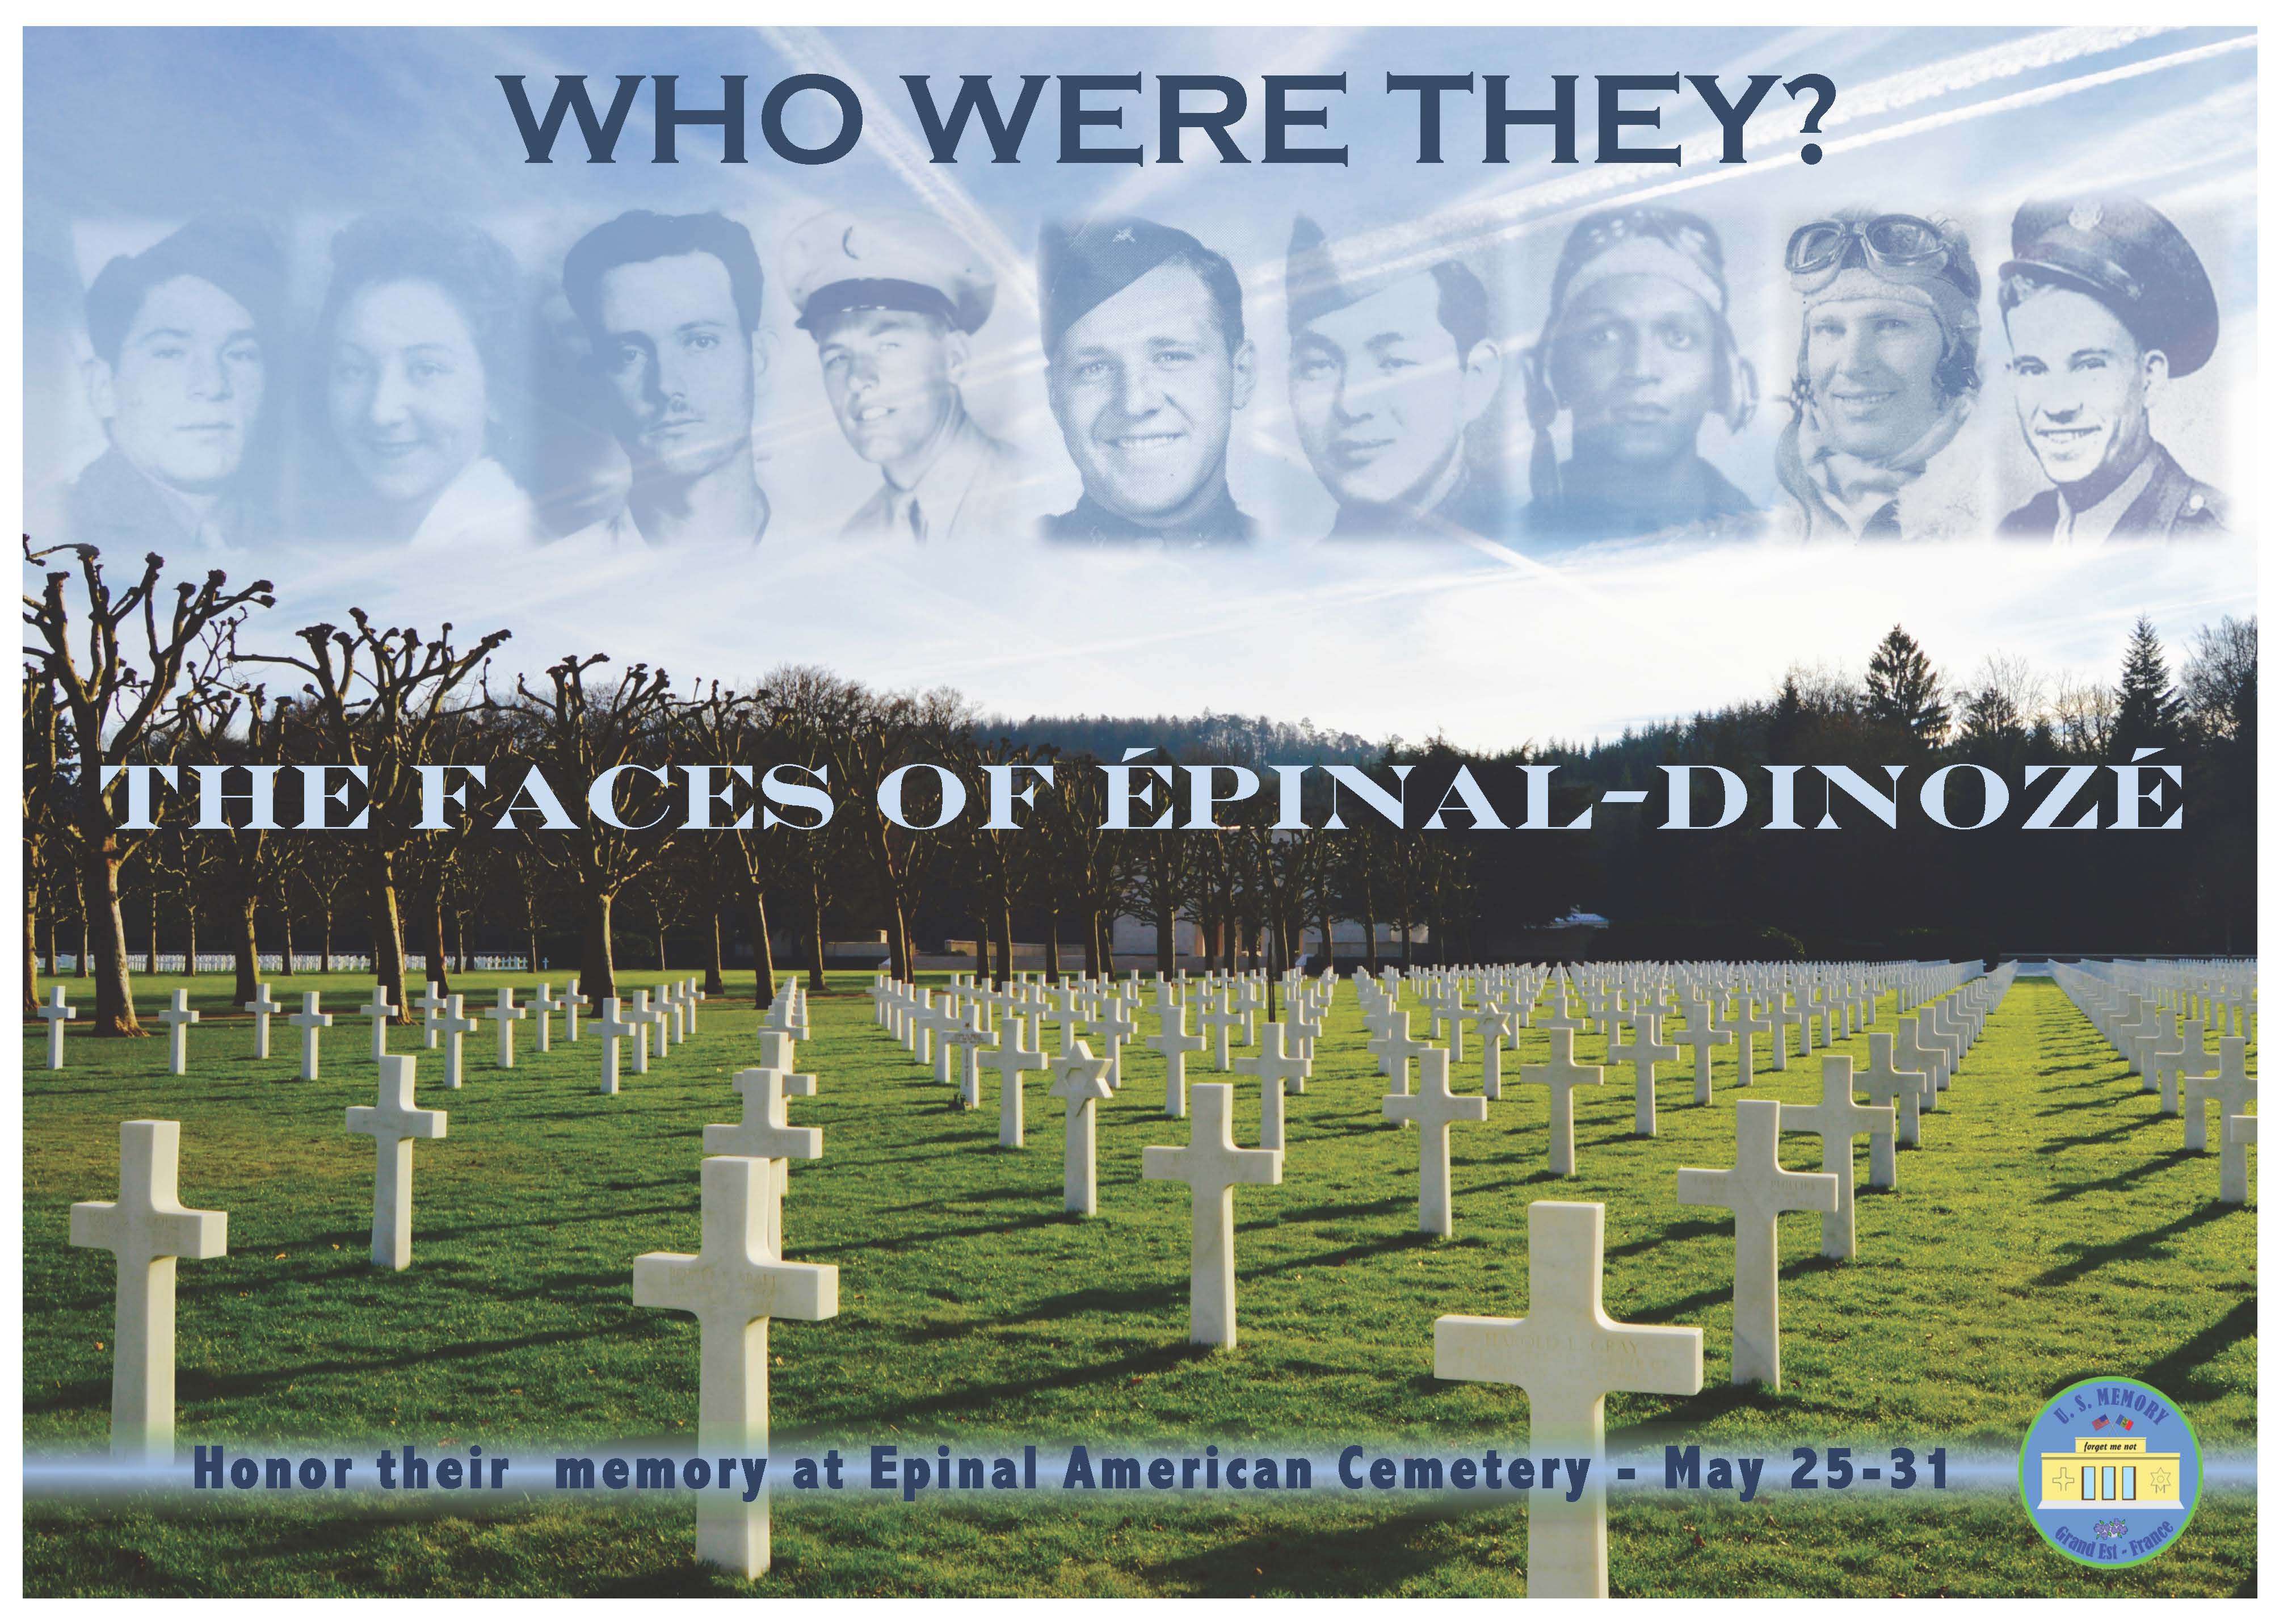 Image of the cemetery with the text: "Who were they? The Faces of Epinal-Dinozé."